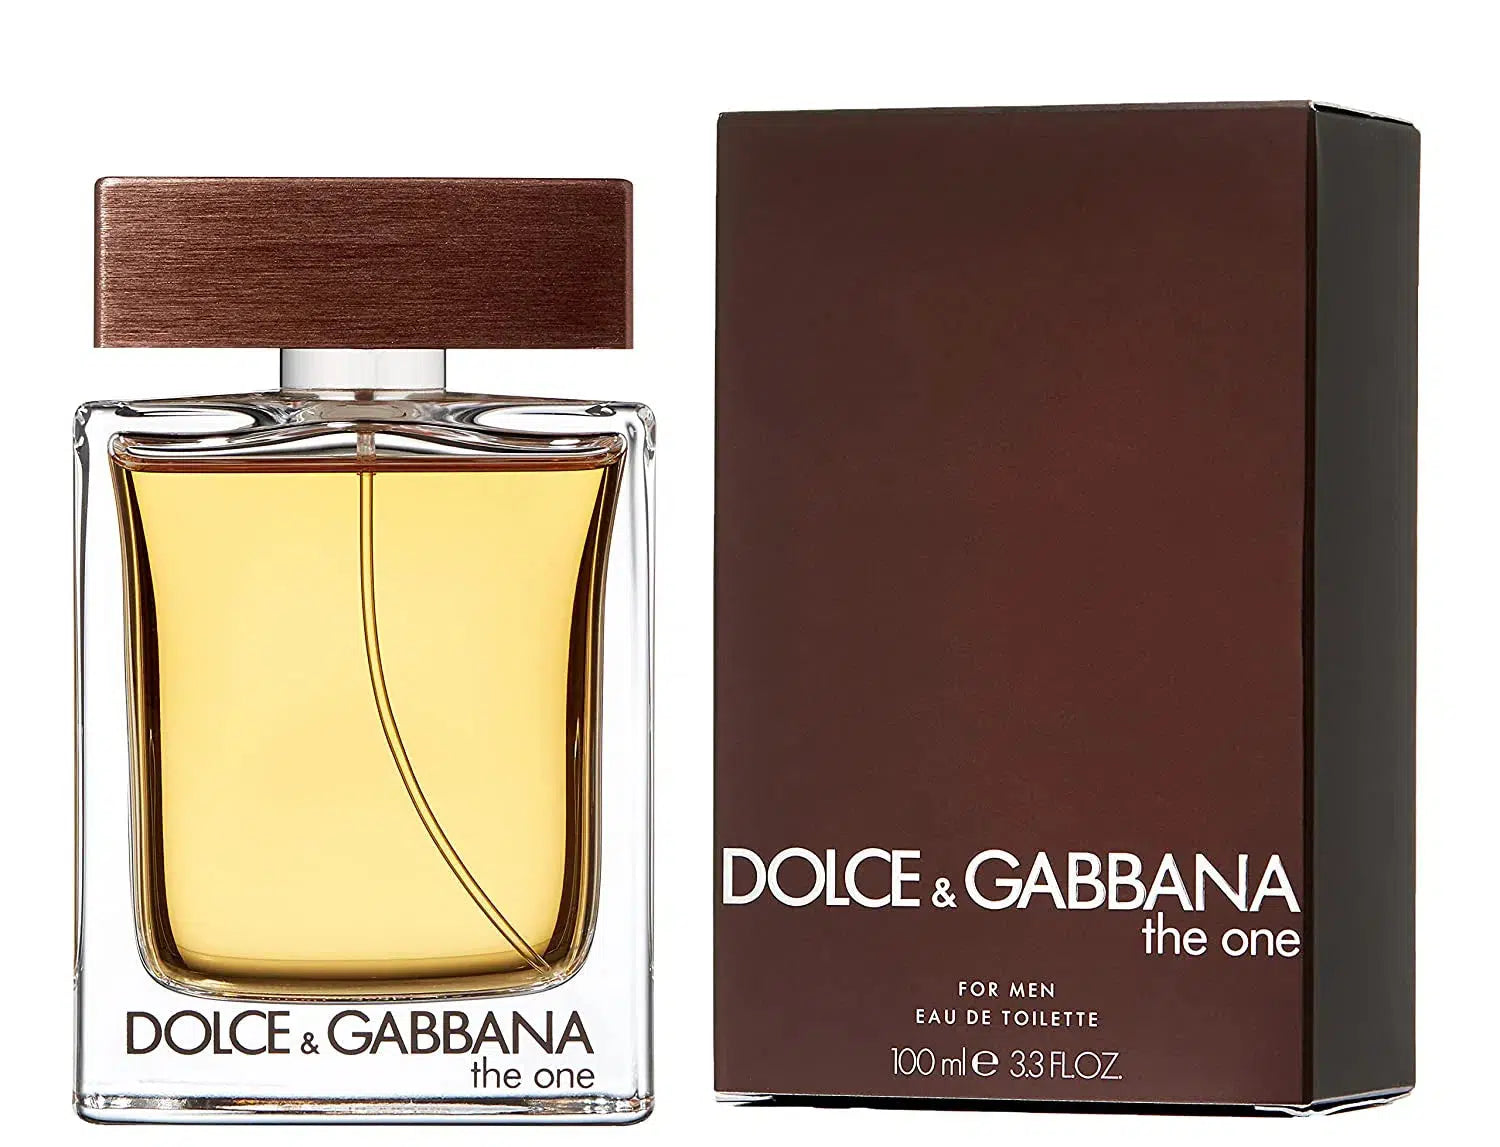 Buy Dolce & Gabbana The One EDT Men 100ml for P3695.00 Only!